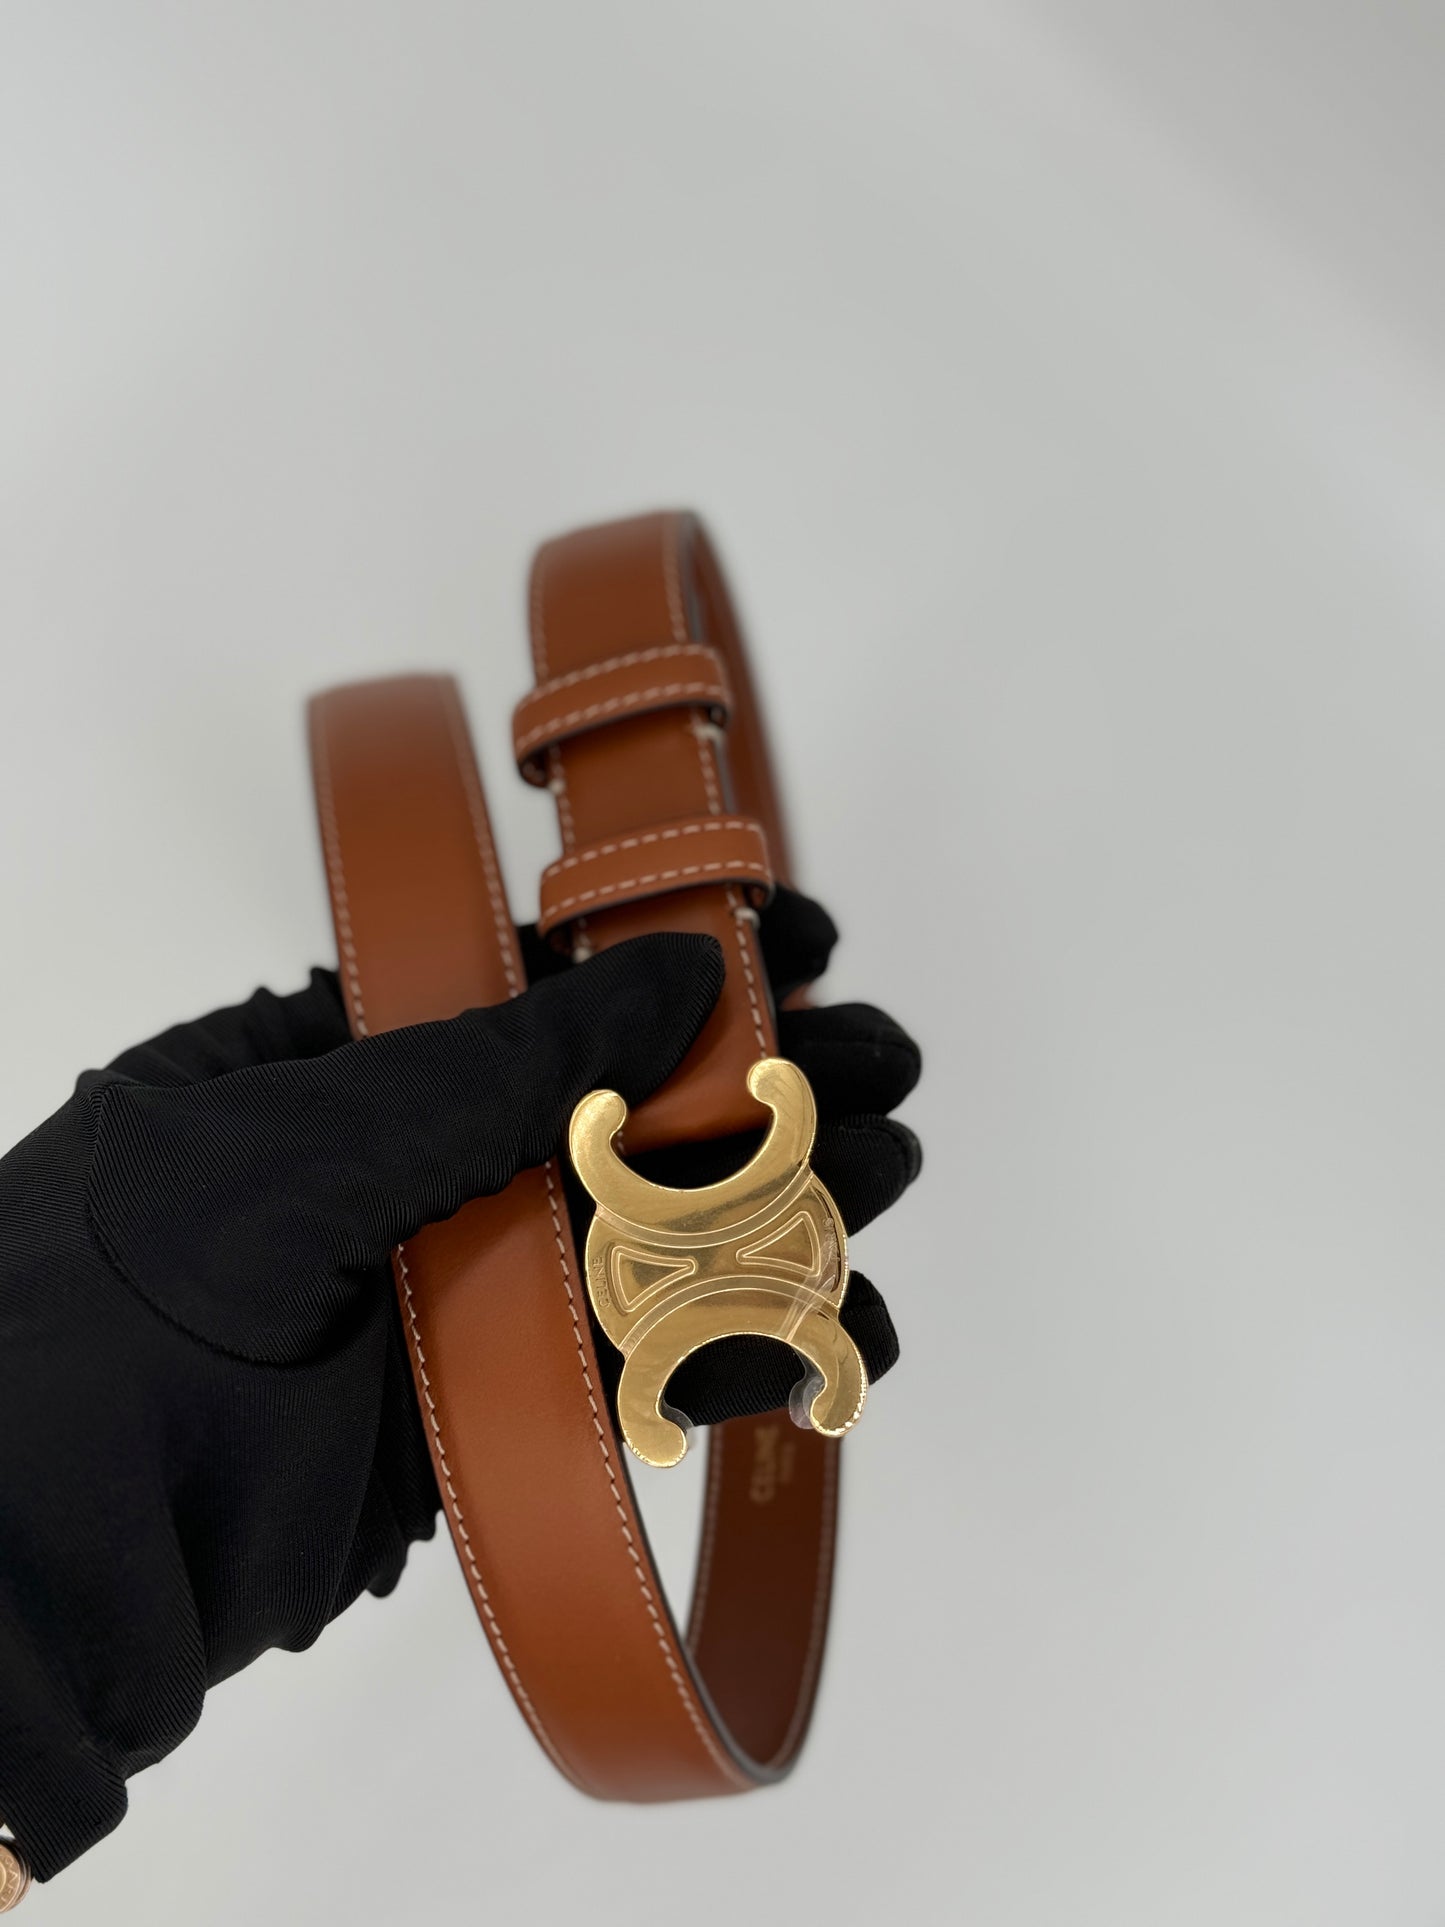 CELINE SMALL TRIOMPHE BELT IN LEATHER BROWN 80